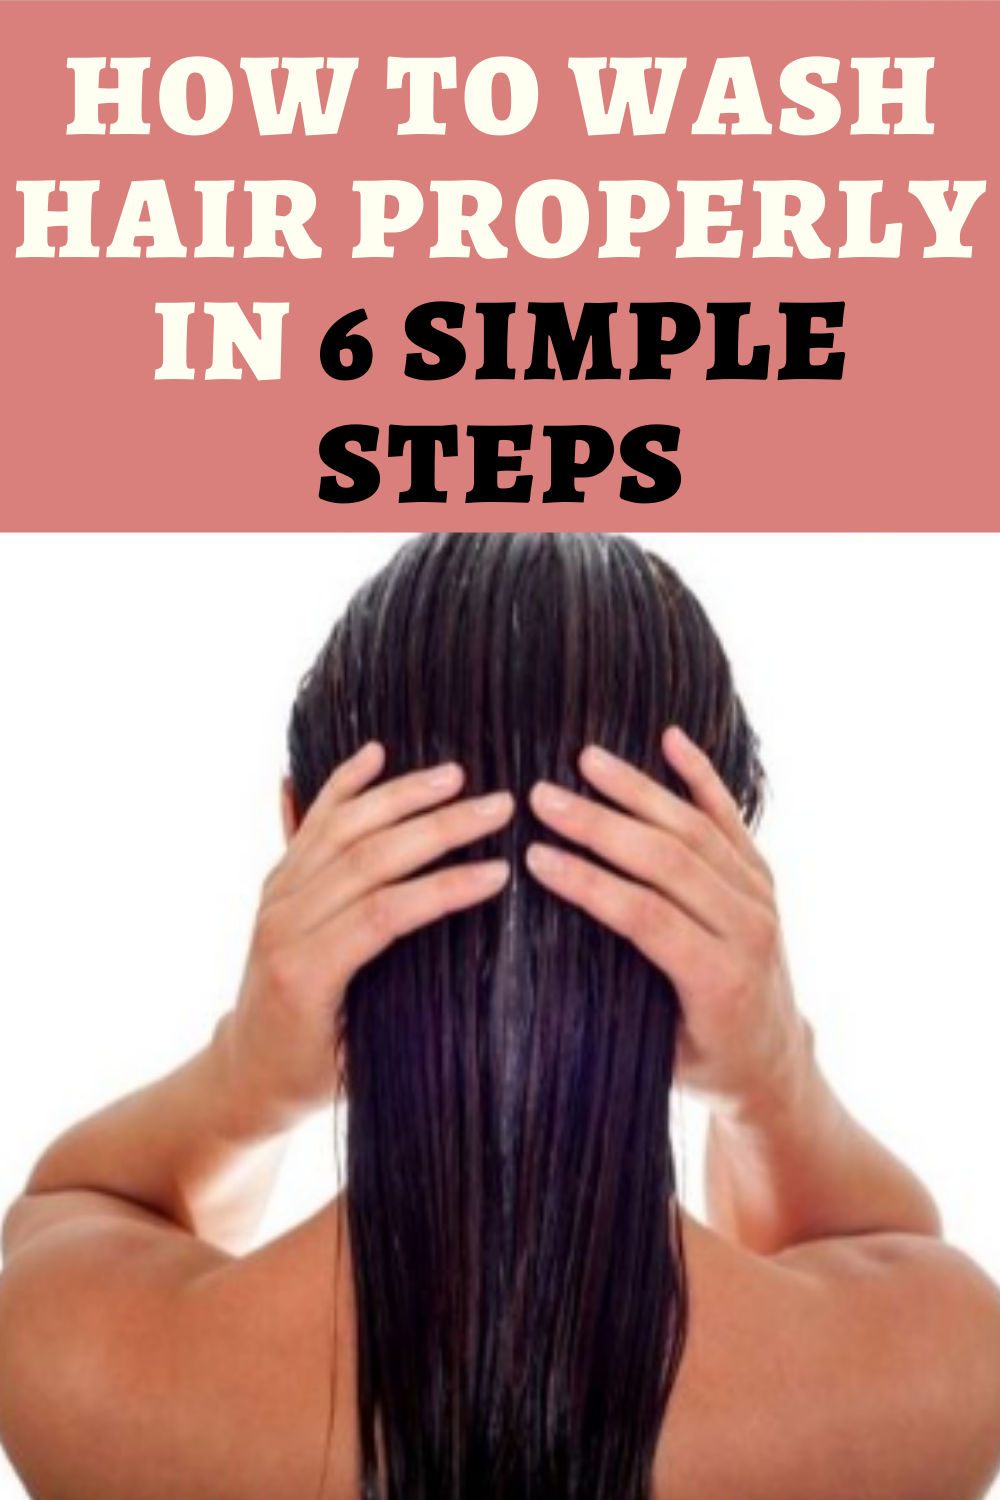 How to Wash Hair Properly in 6 Simple Steps